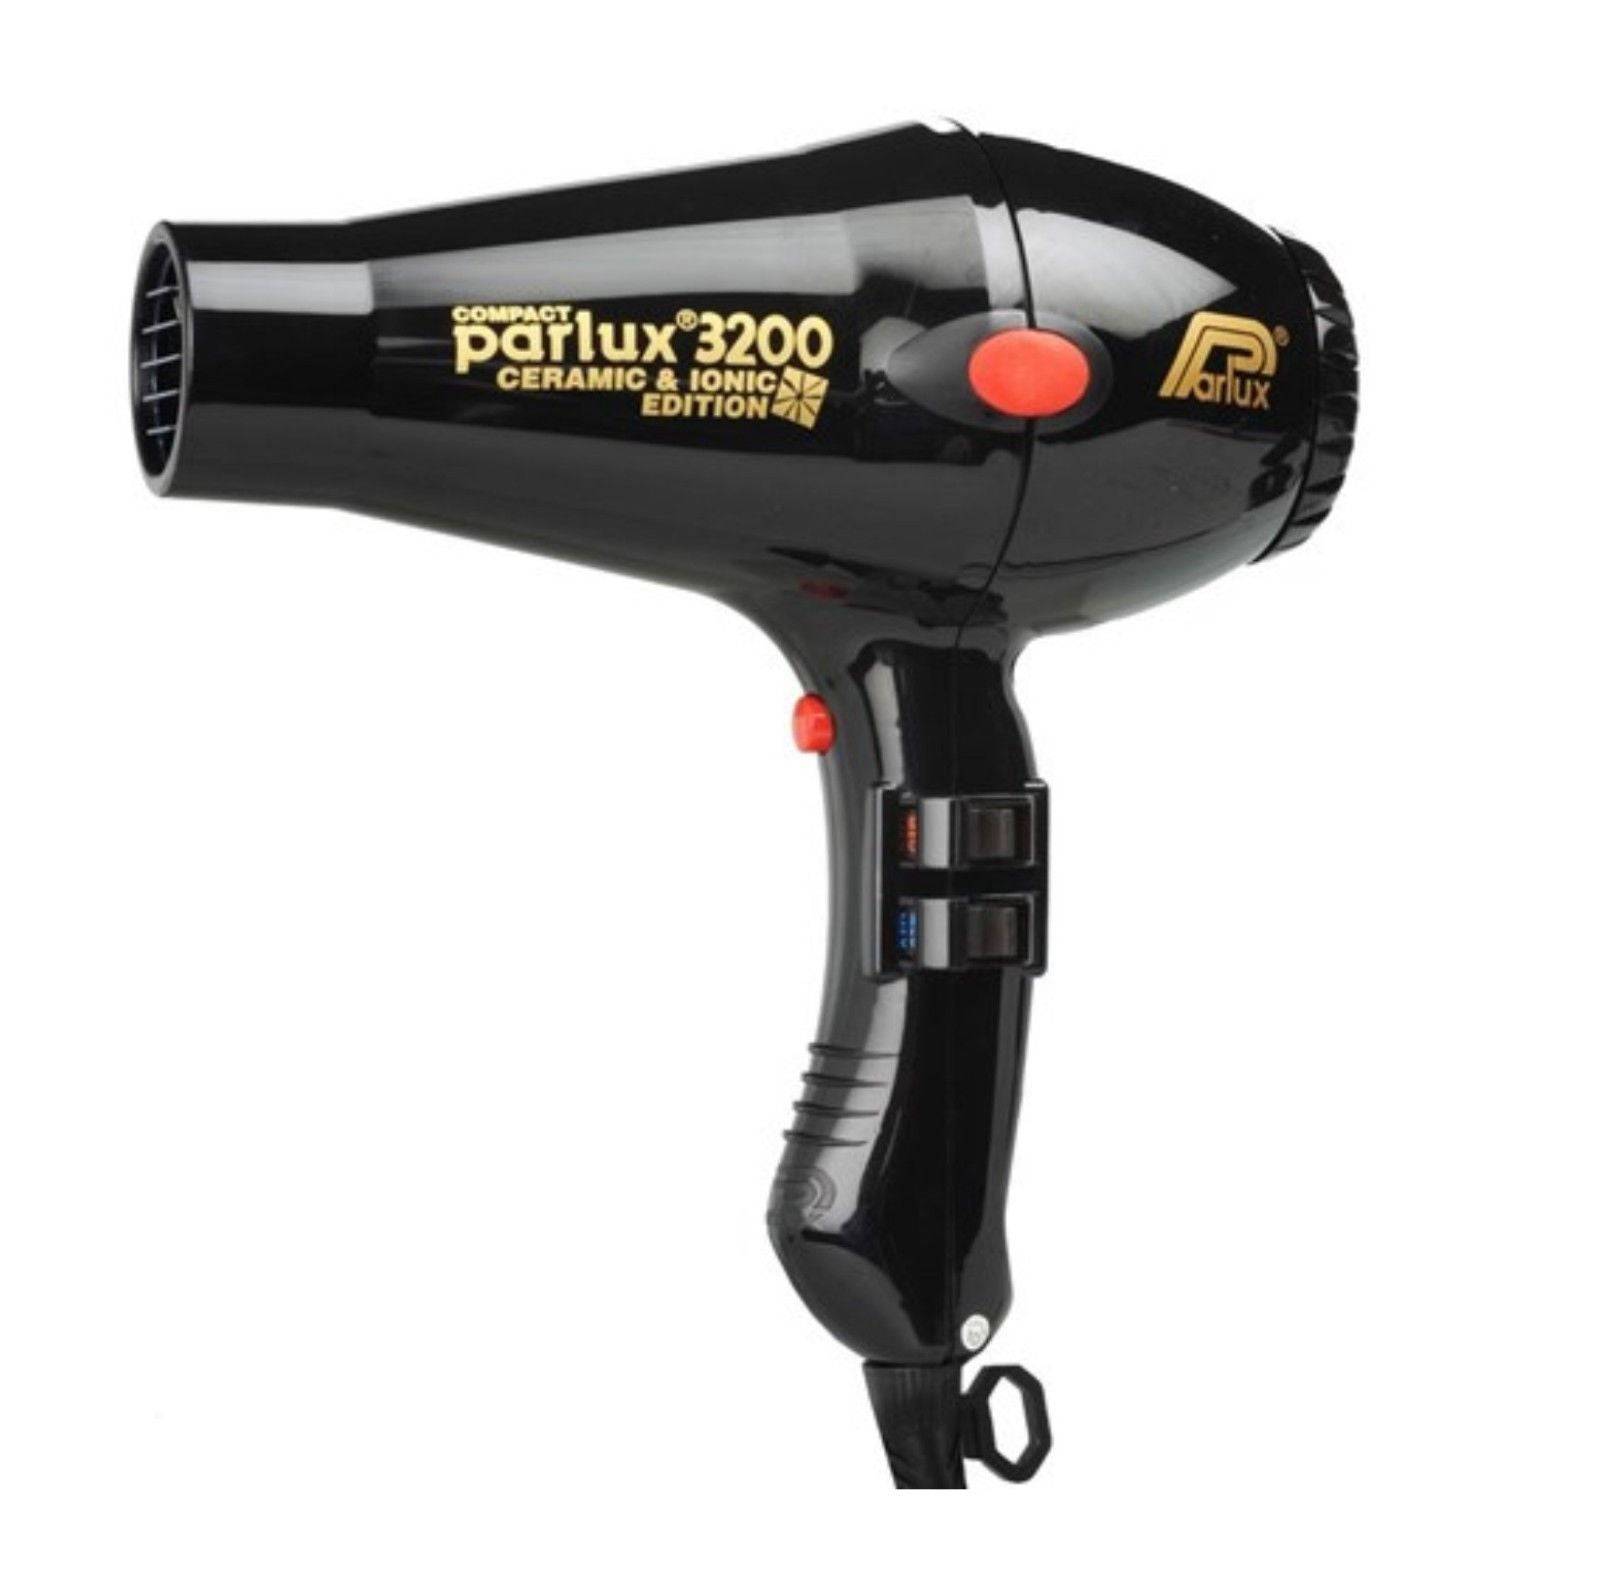 Parlux 3200 Ionic + Ceramic Compact Hair Dryer - Black 2 year Warranty  W510g - On Line Hair Depot